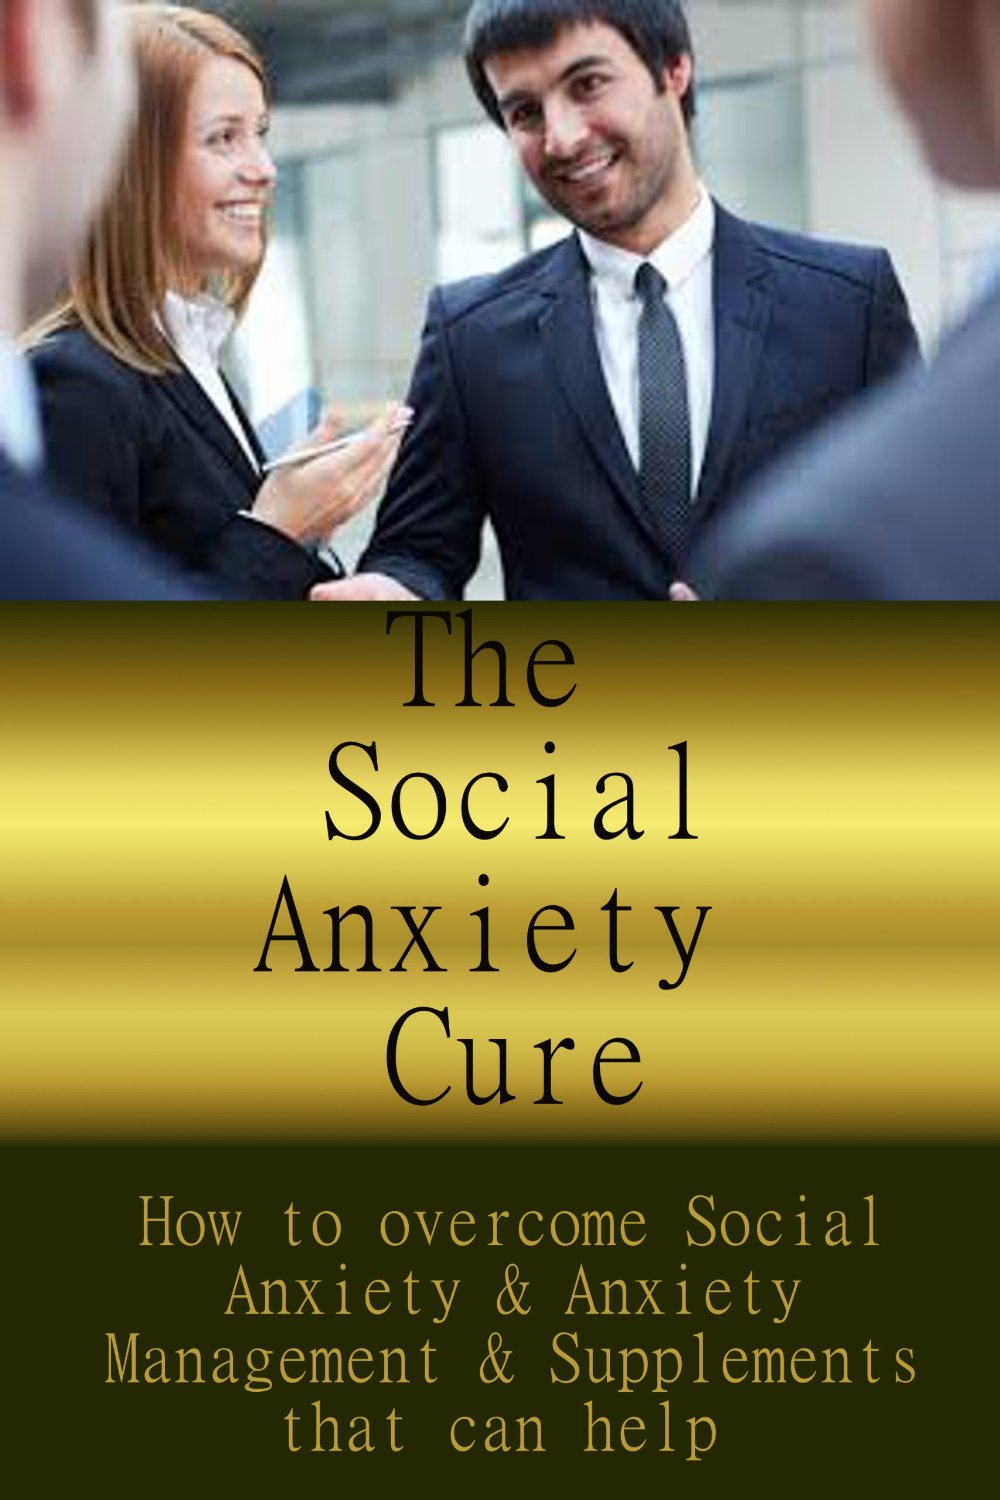 The Social Anxiety Cure by Alex White